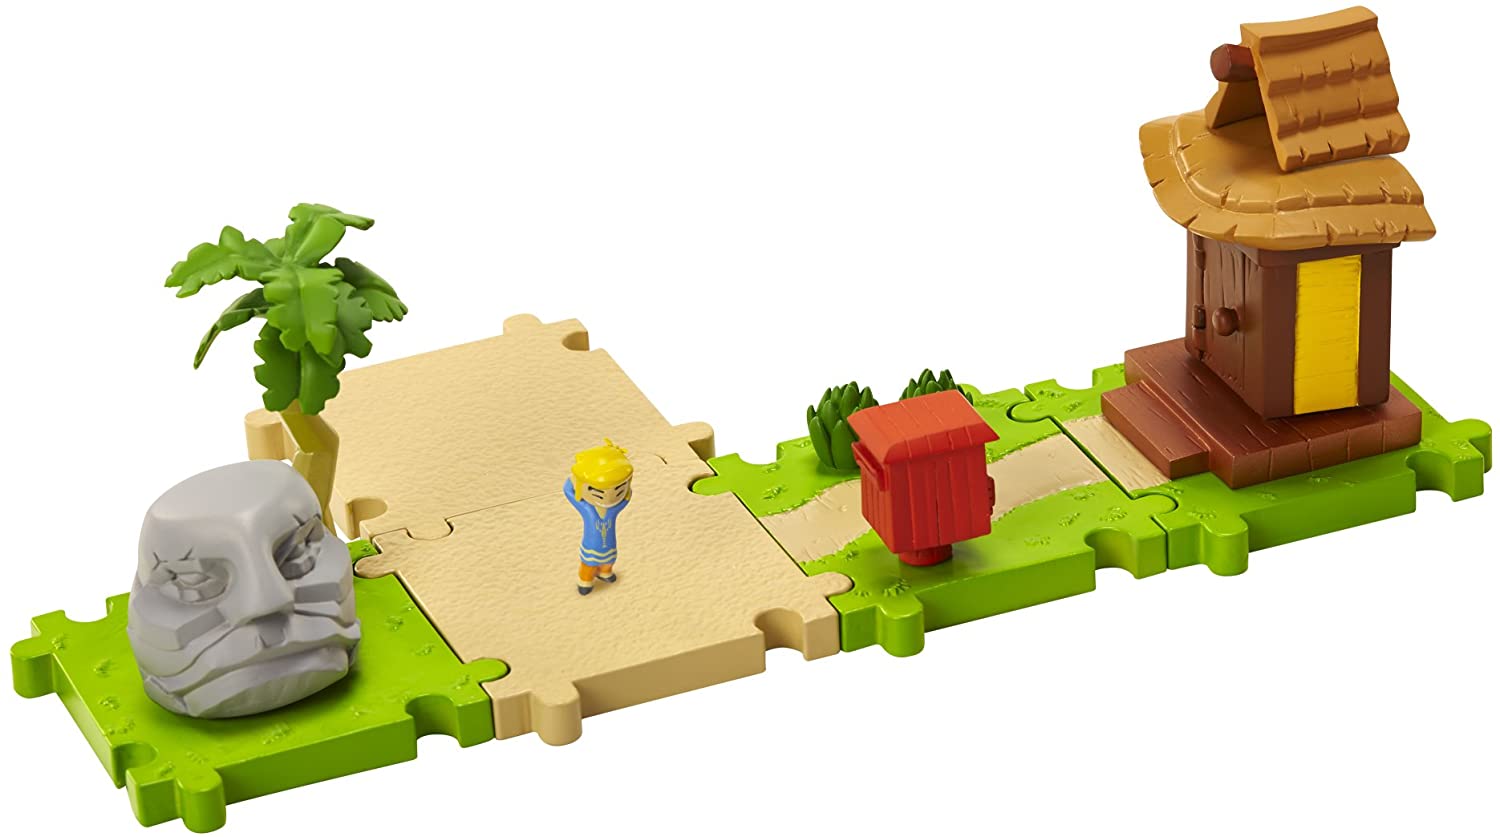 World of Nintendo Outset Island Micro Deluxe Pack